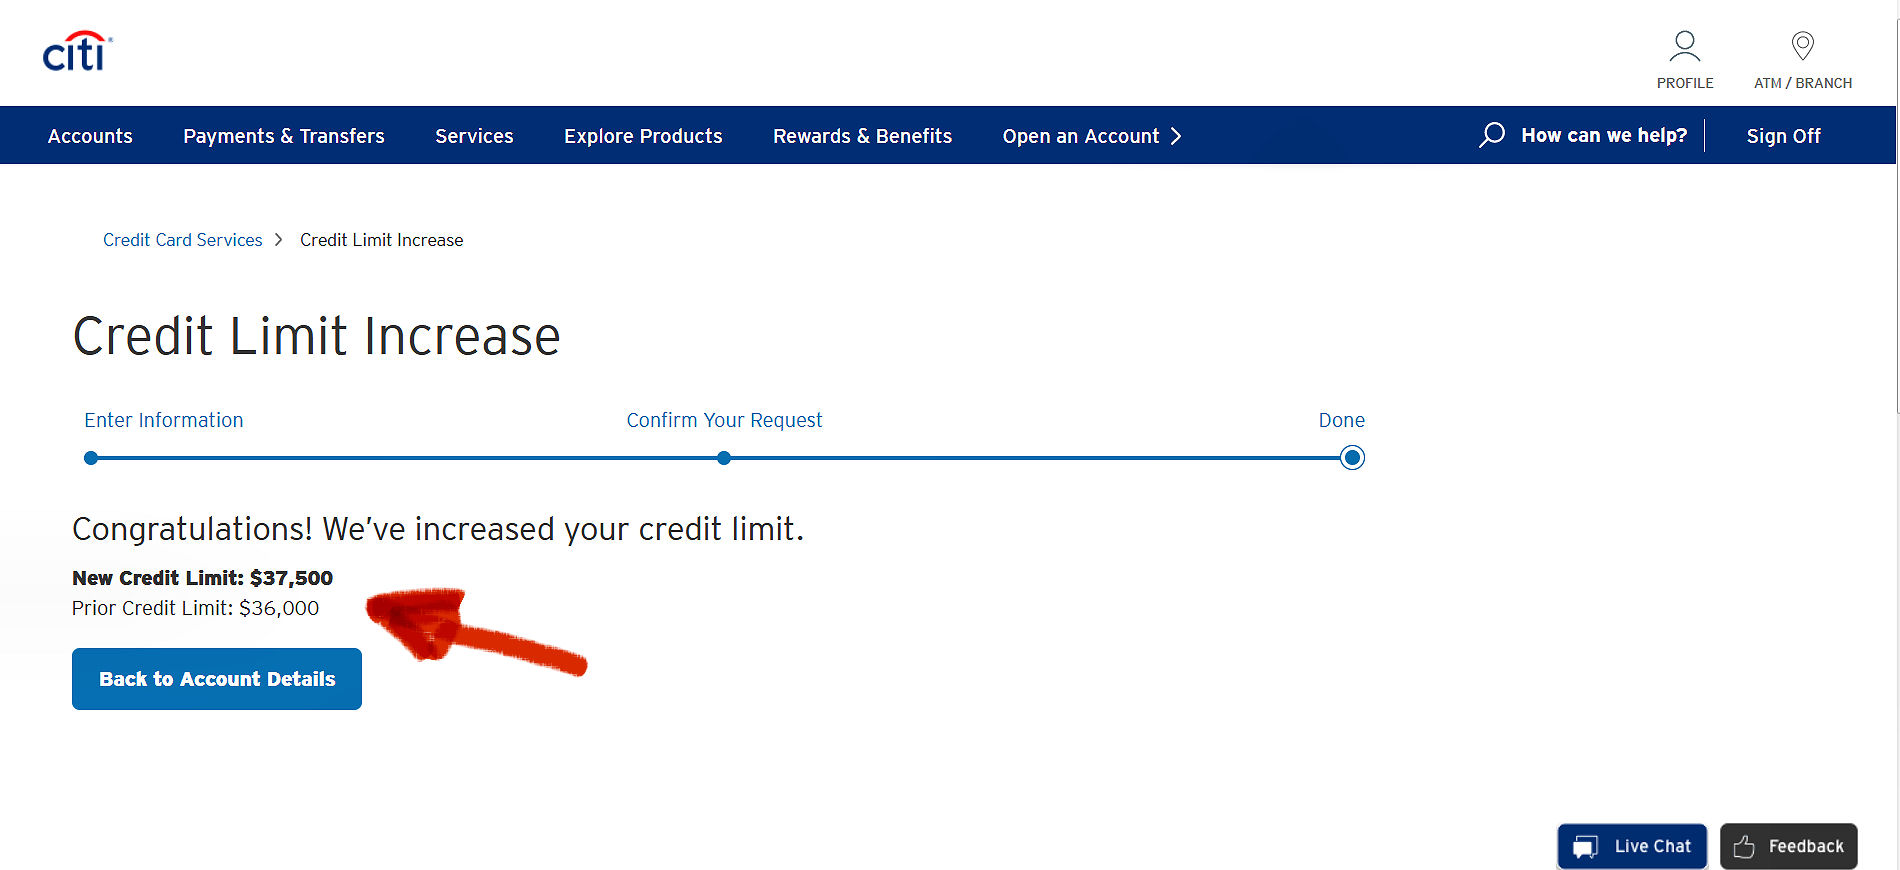 How Often Does Citi Increase Credit Limit